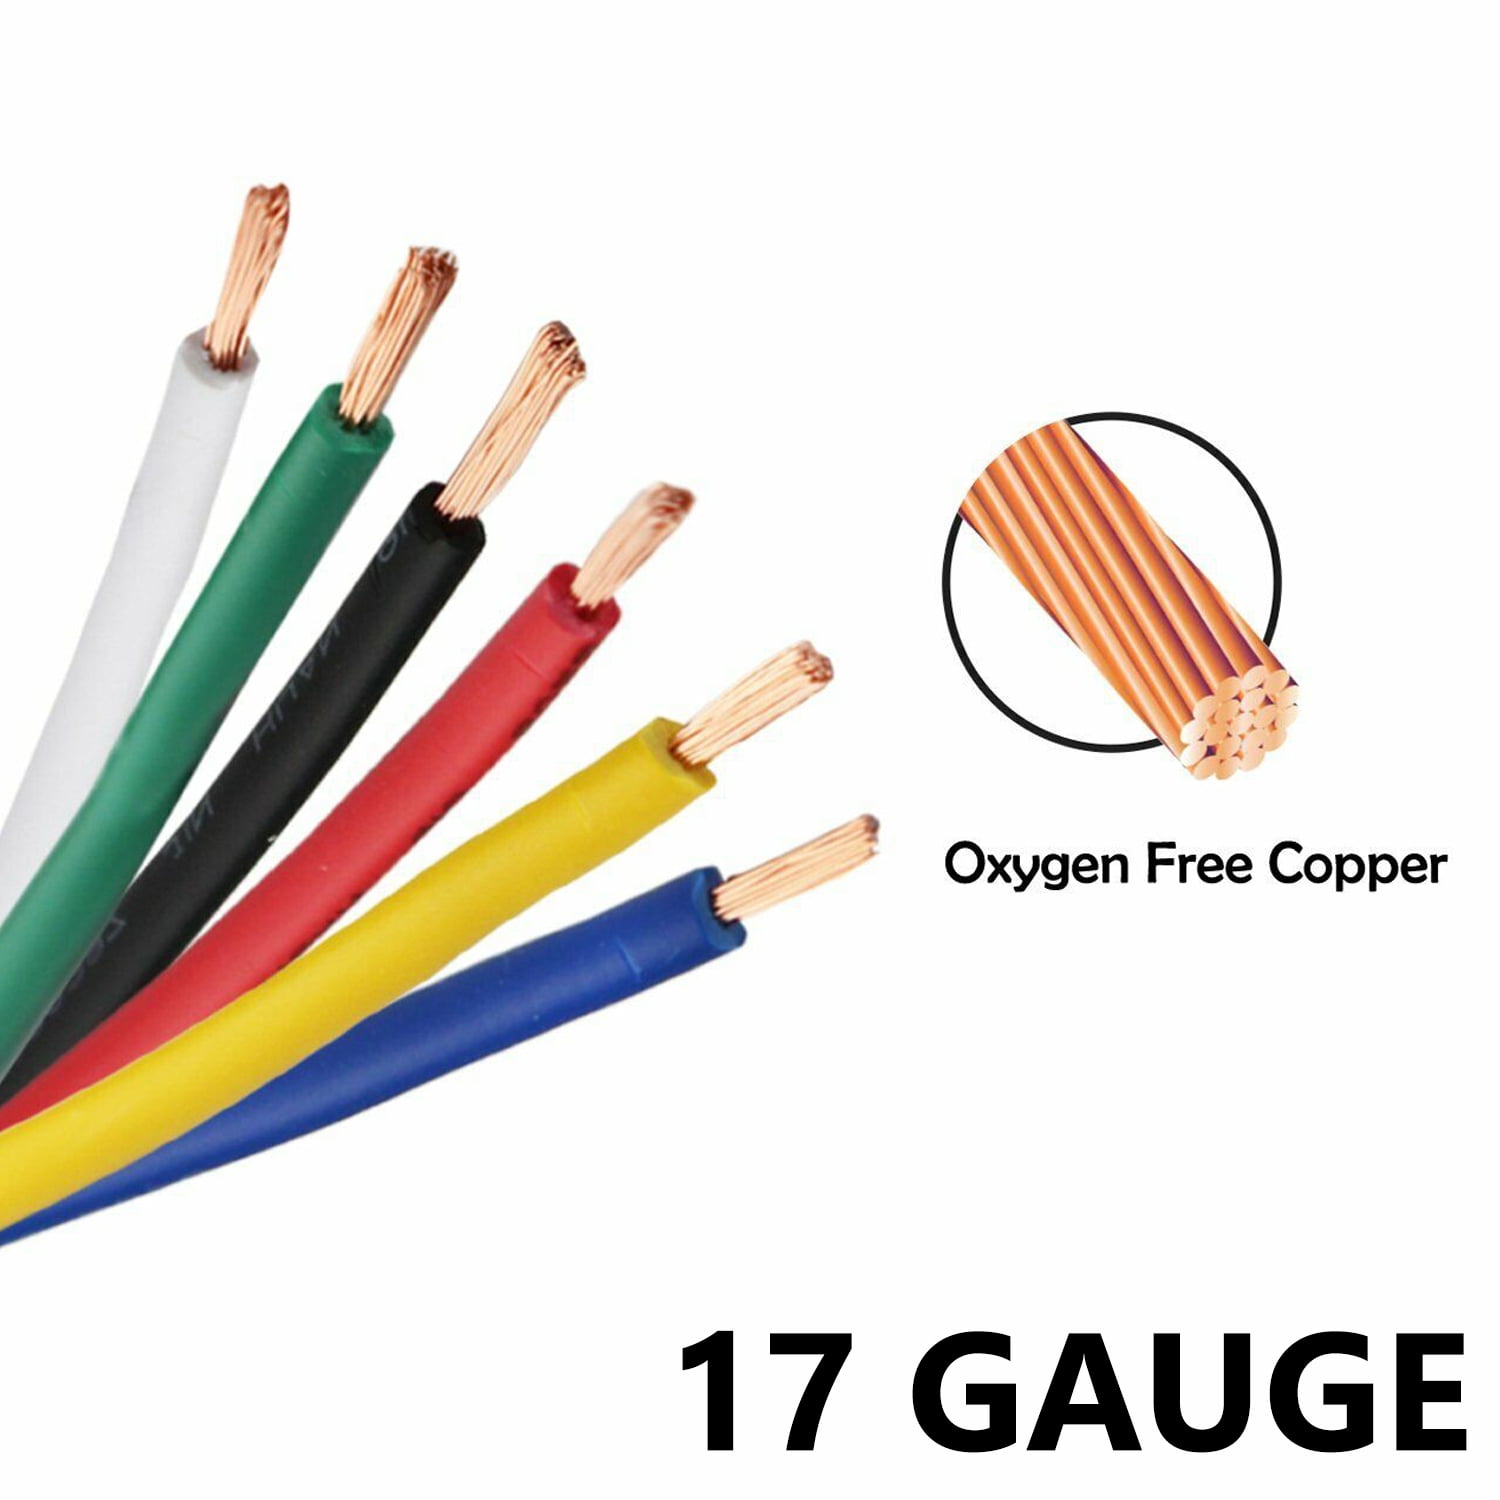 12 GAUGE GPT WIRE 11 COLORS 100 FT EA PRIMARY AWG STRANDED 100% OFC COPPER 